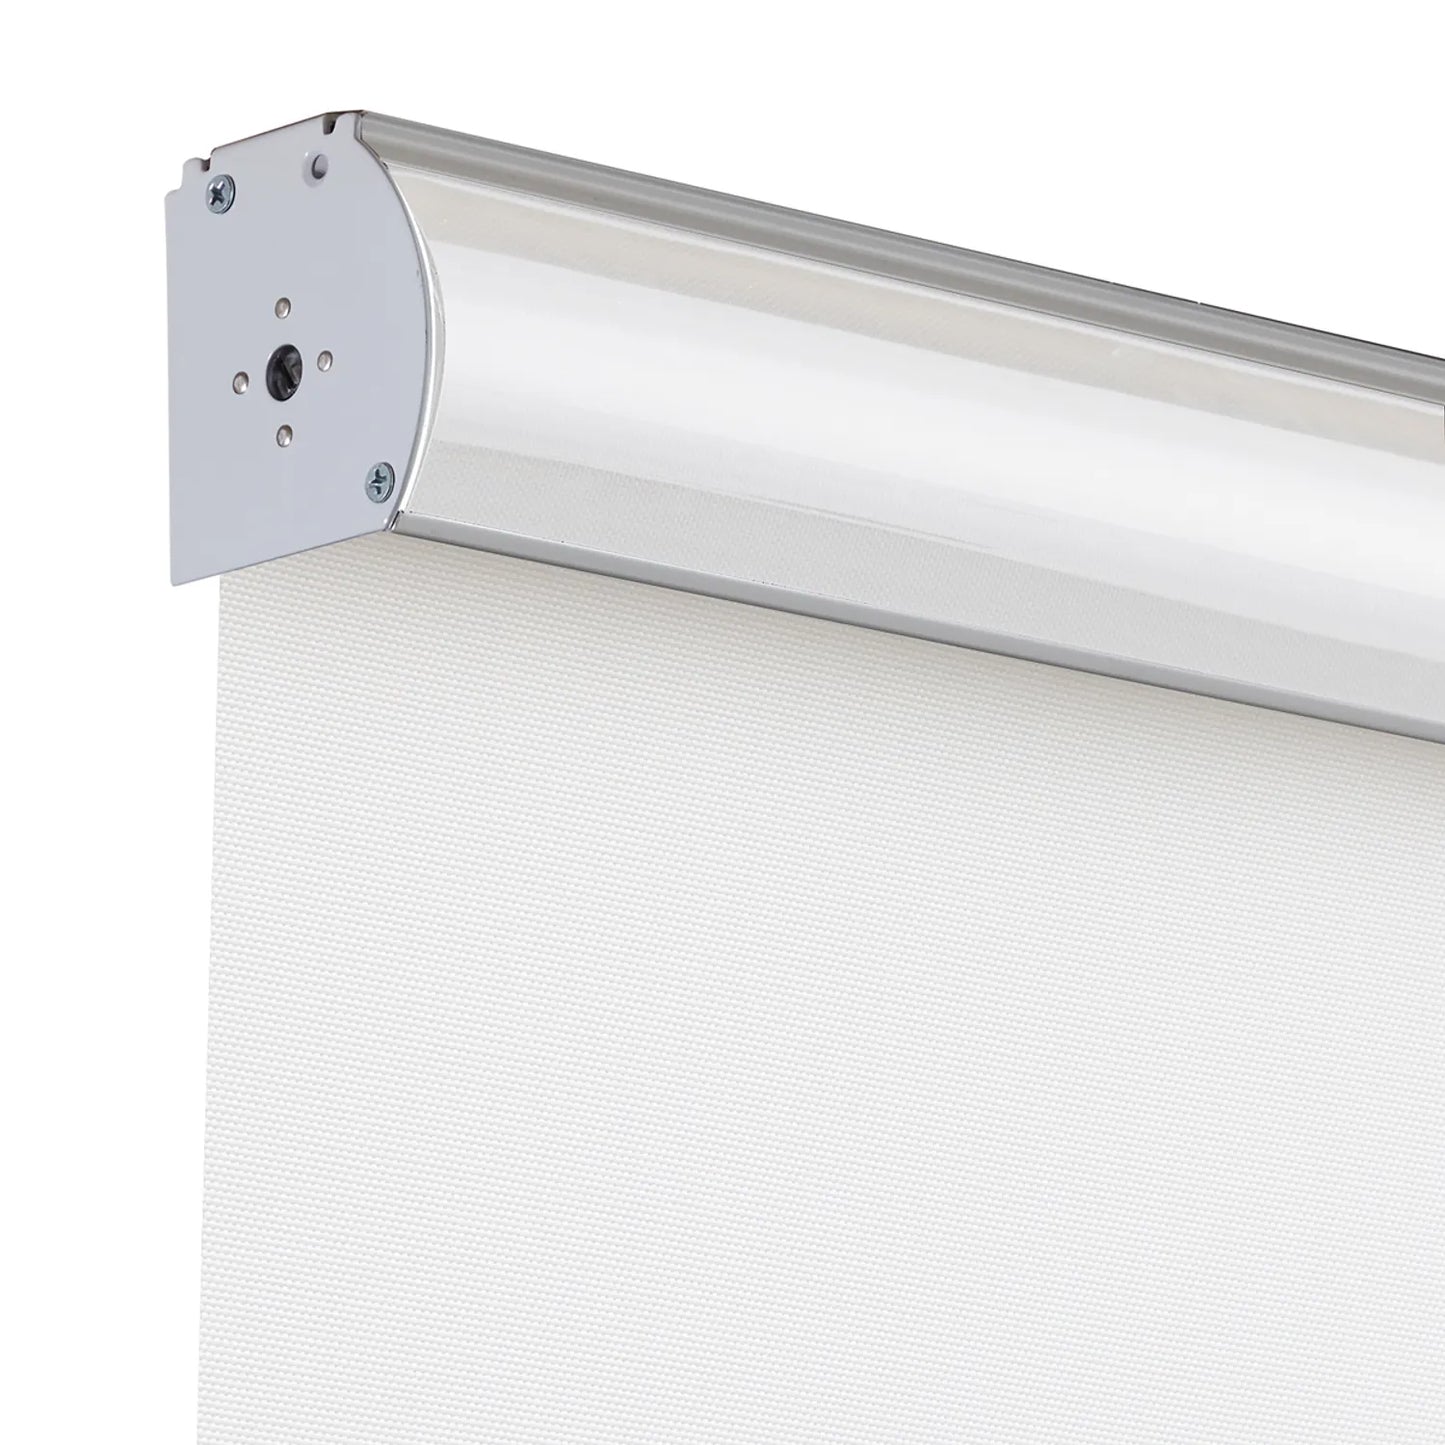 Close-up of EaseEase UV Blocker Roller Blind showing robust roller tube and cordless bracket design for safe and easy installation